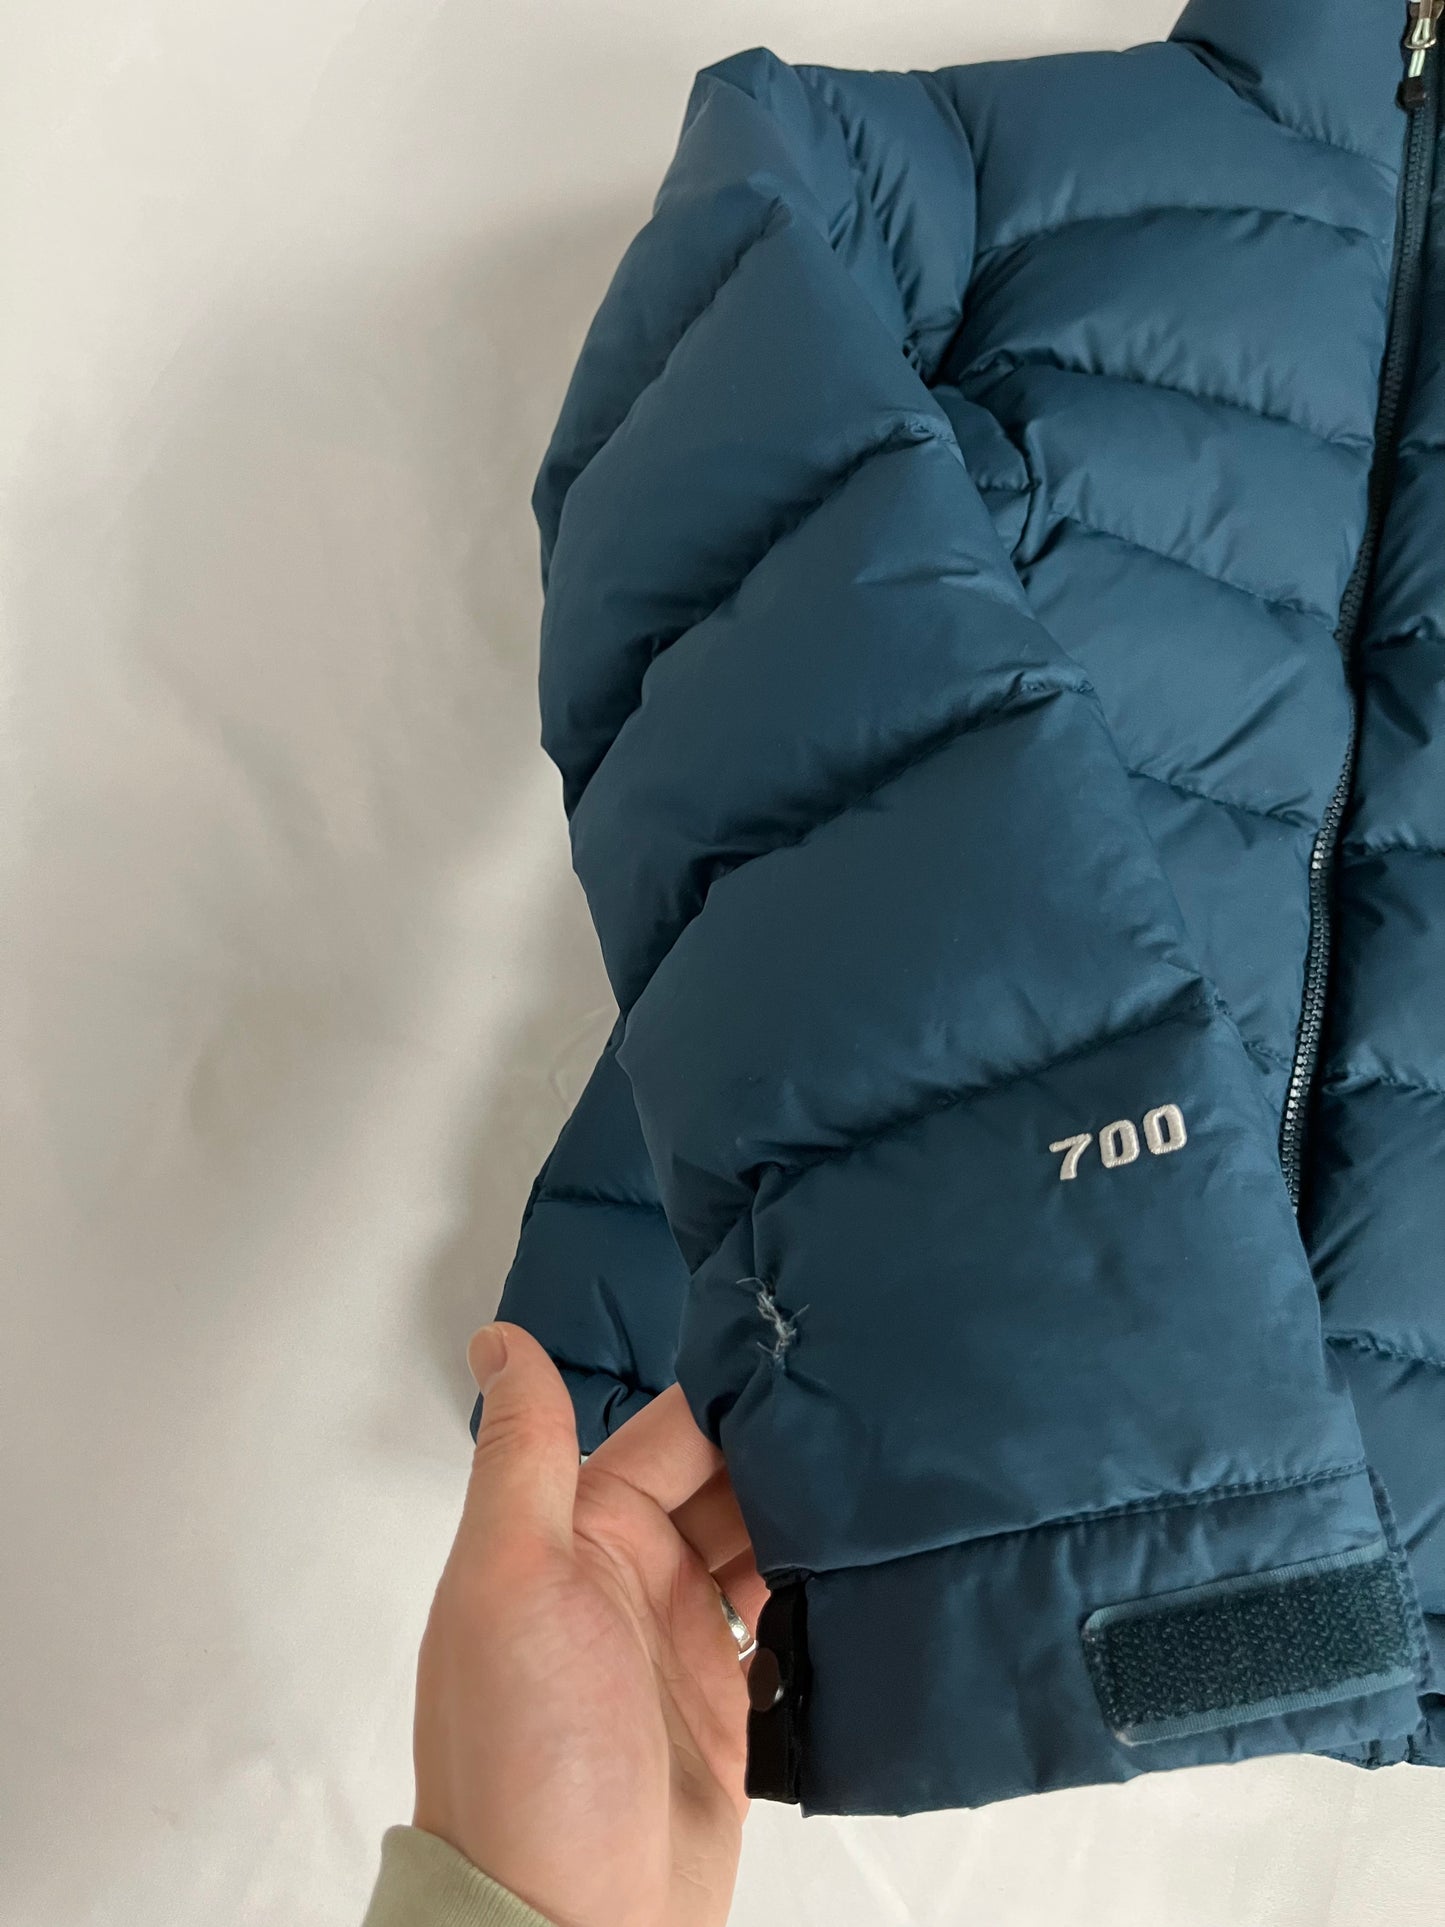 Vintage North Face Teal 700 Puffer